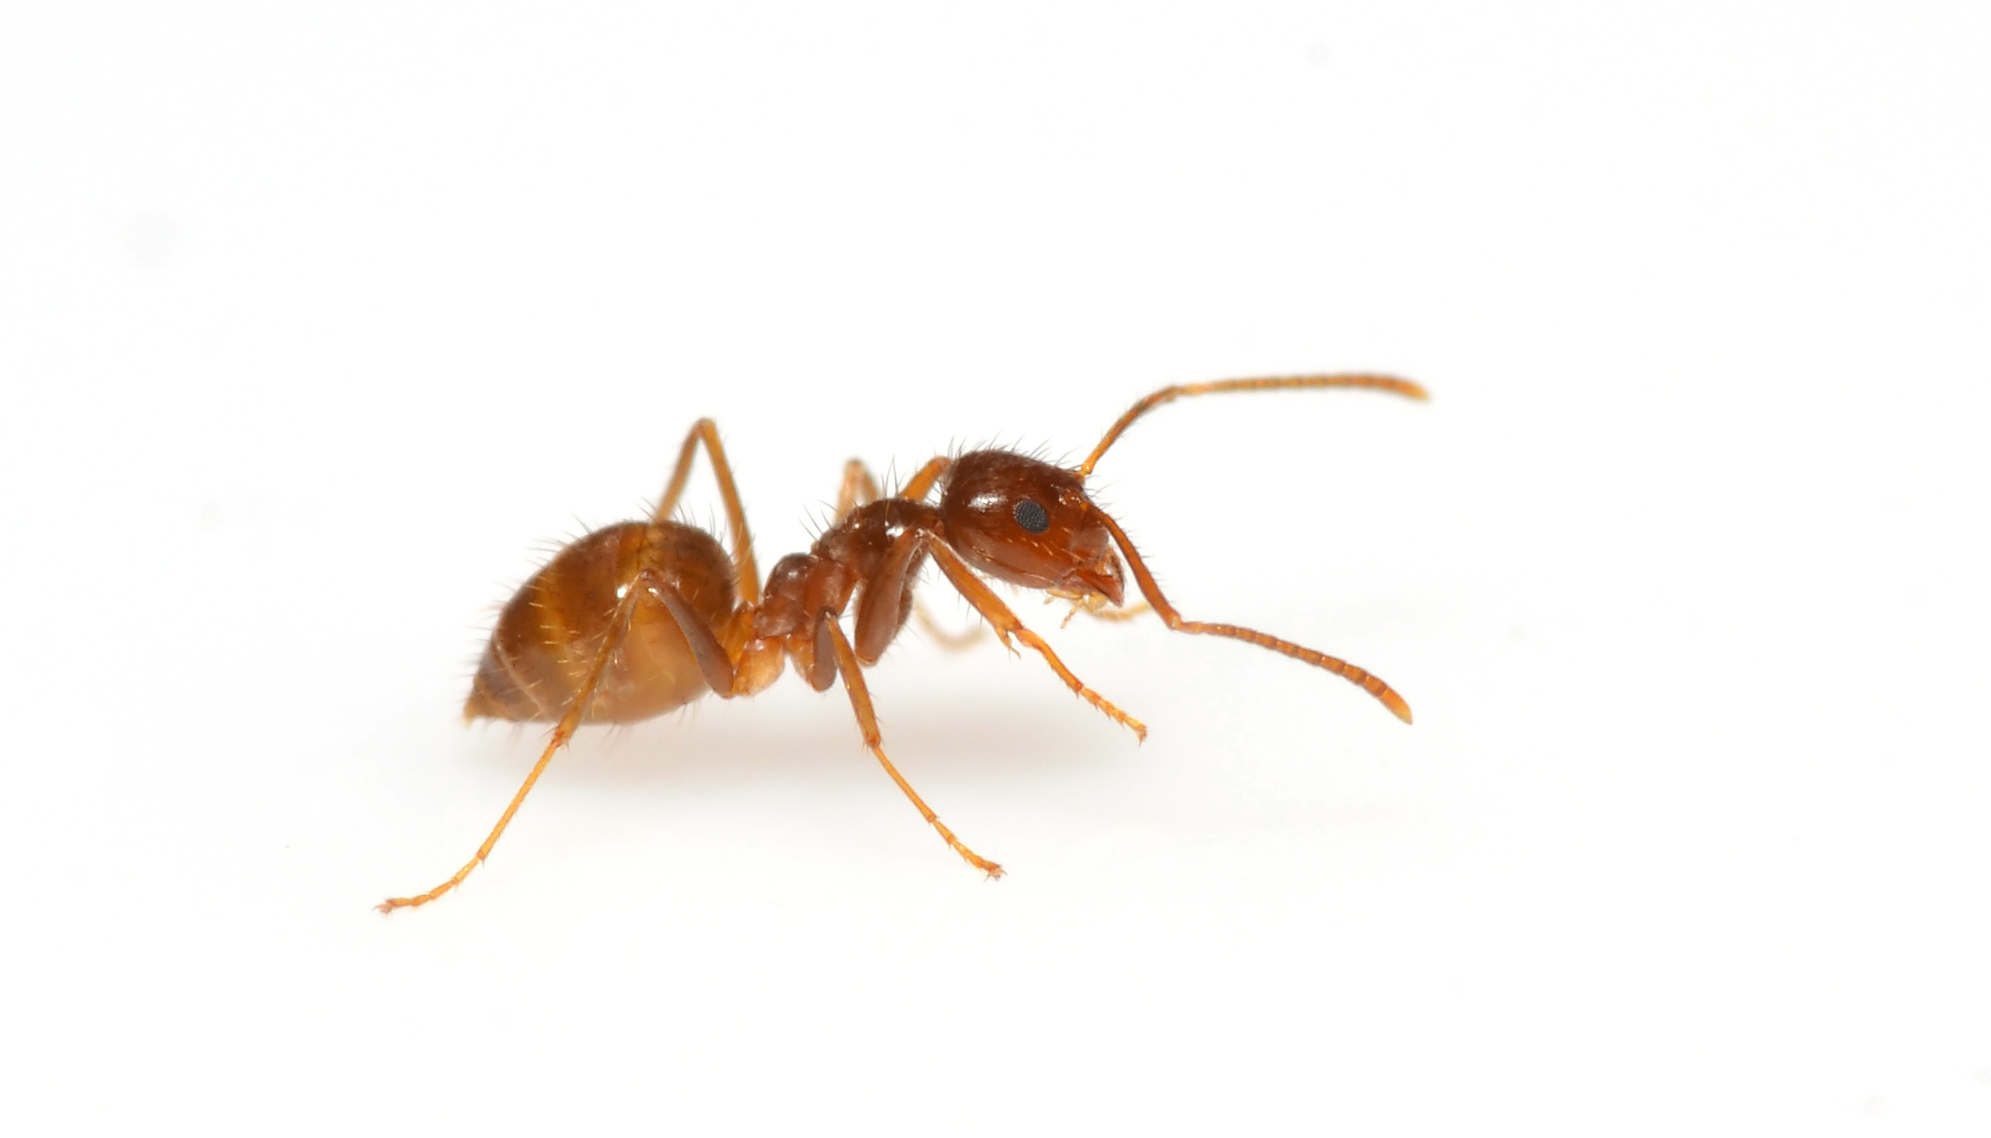 5 crazy facts about crazy ants | MNN - Mother Nature Network